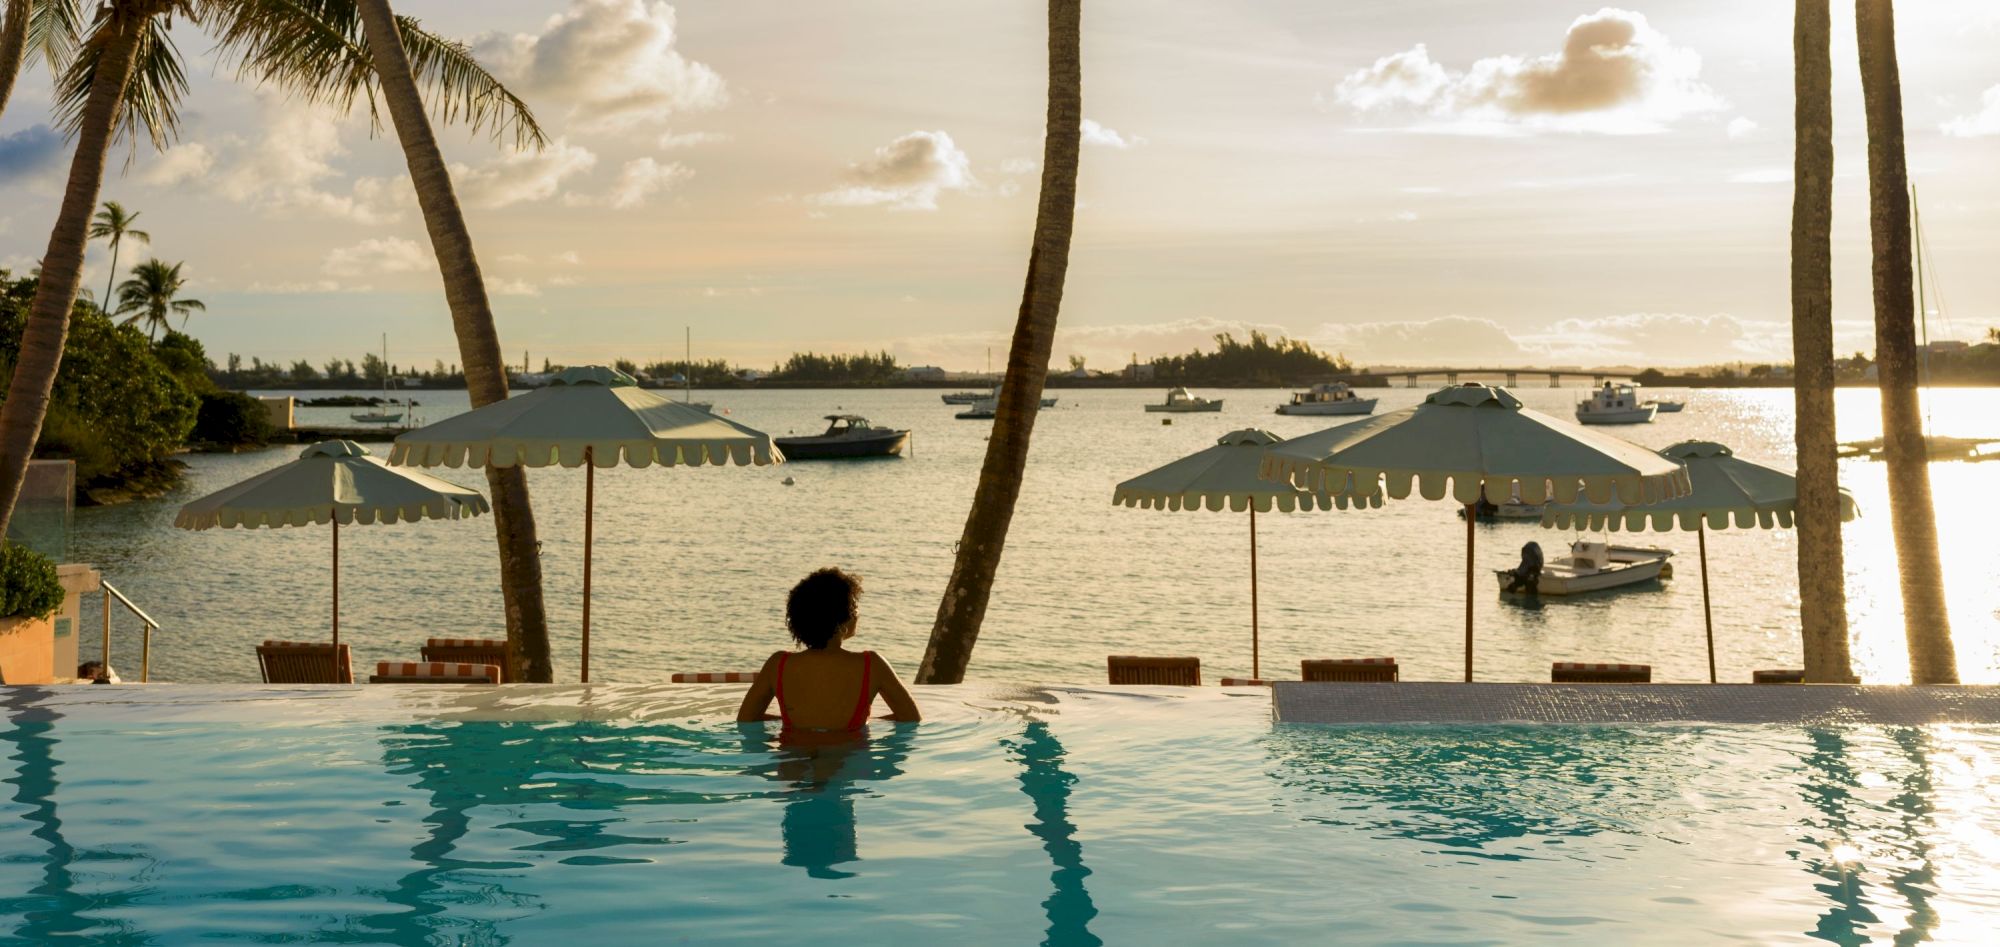 A person relaxes in a pool overlooking a scenic waterfront with boats, parasols, and palm trees at sunset.